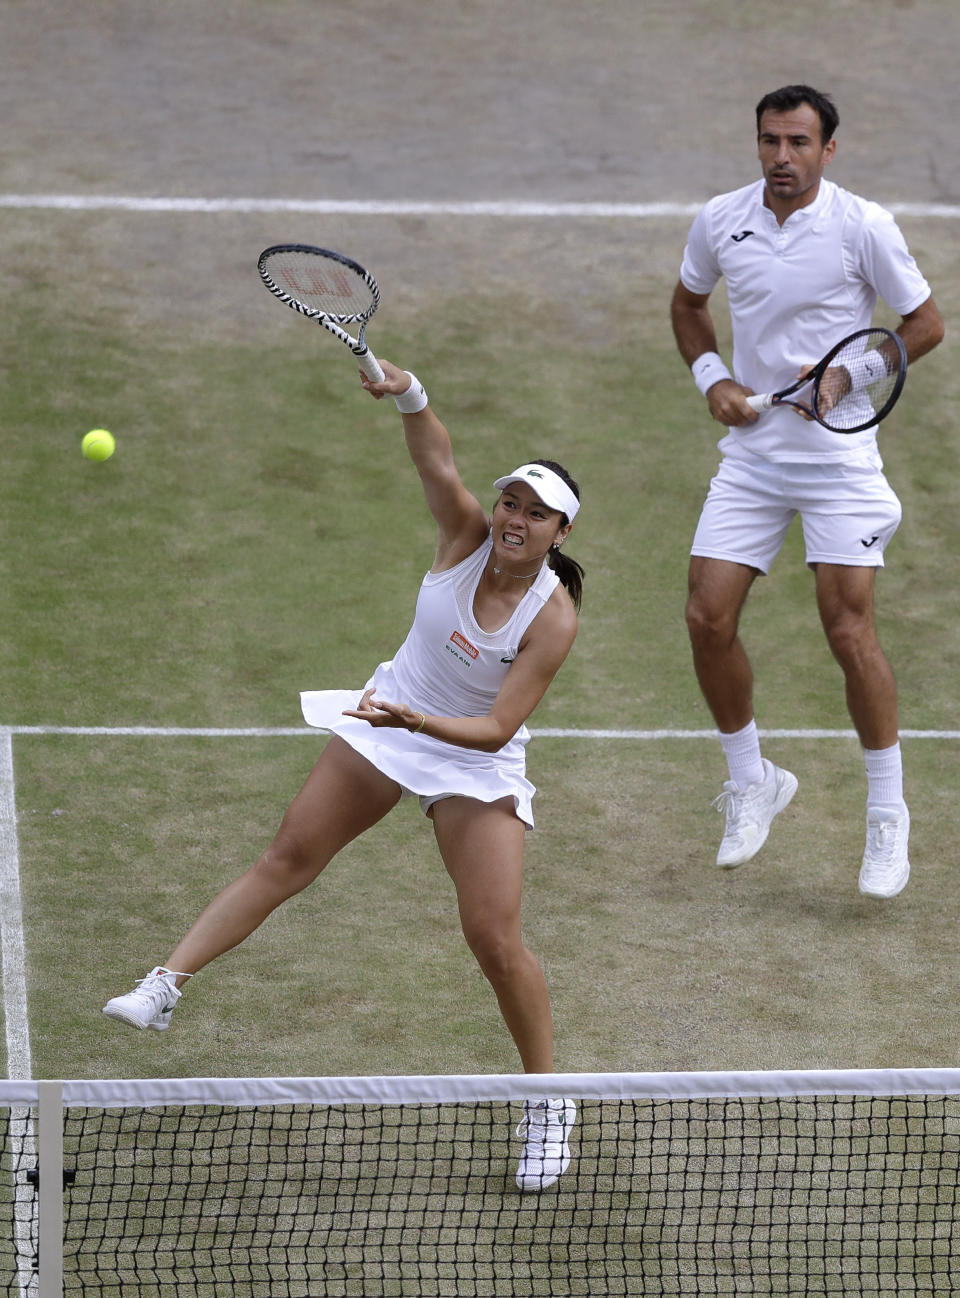 Taiwan's Latisha Chan, left, and Croatia's Ivan Dodig in action against Latvia's Jelena Ostapenko and Sweden's Robert Lindstedt during the mixed doubles final match of the Wimbledon Tennis Championships in London, Sunday, July 14, 2019. (AP Photo/Kirsty Wigglesworth)